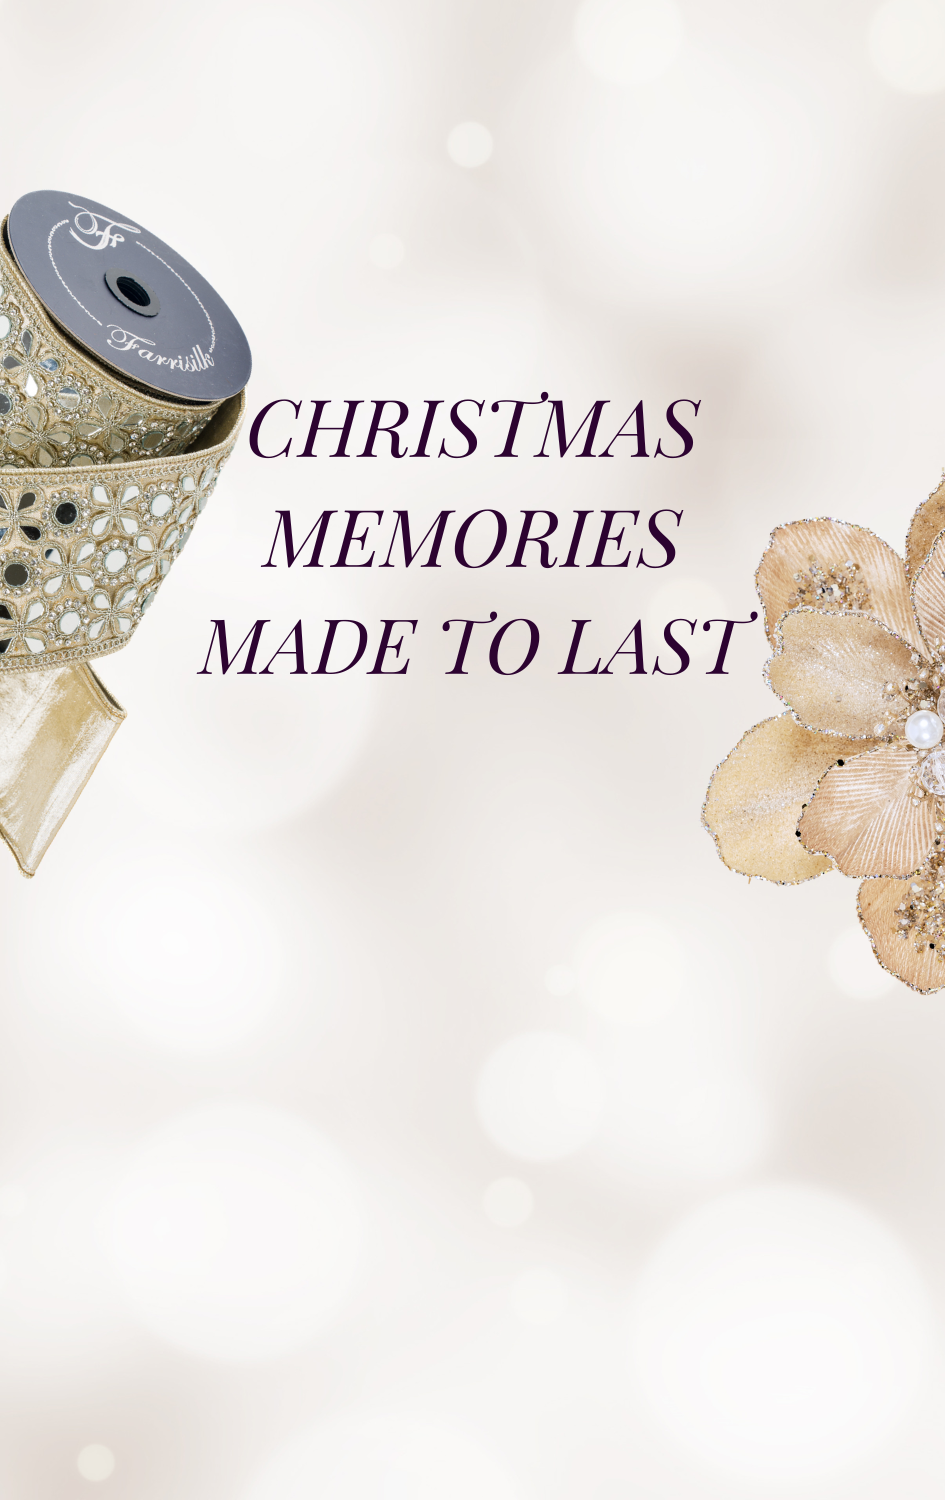 For over 30 years, Farrisilk has been committed to producing the finest heirloom-quality holiday decor products.